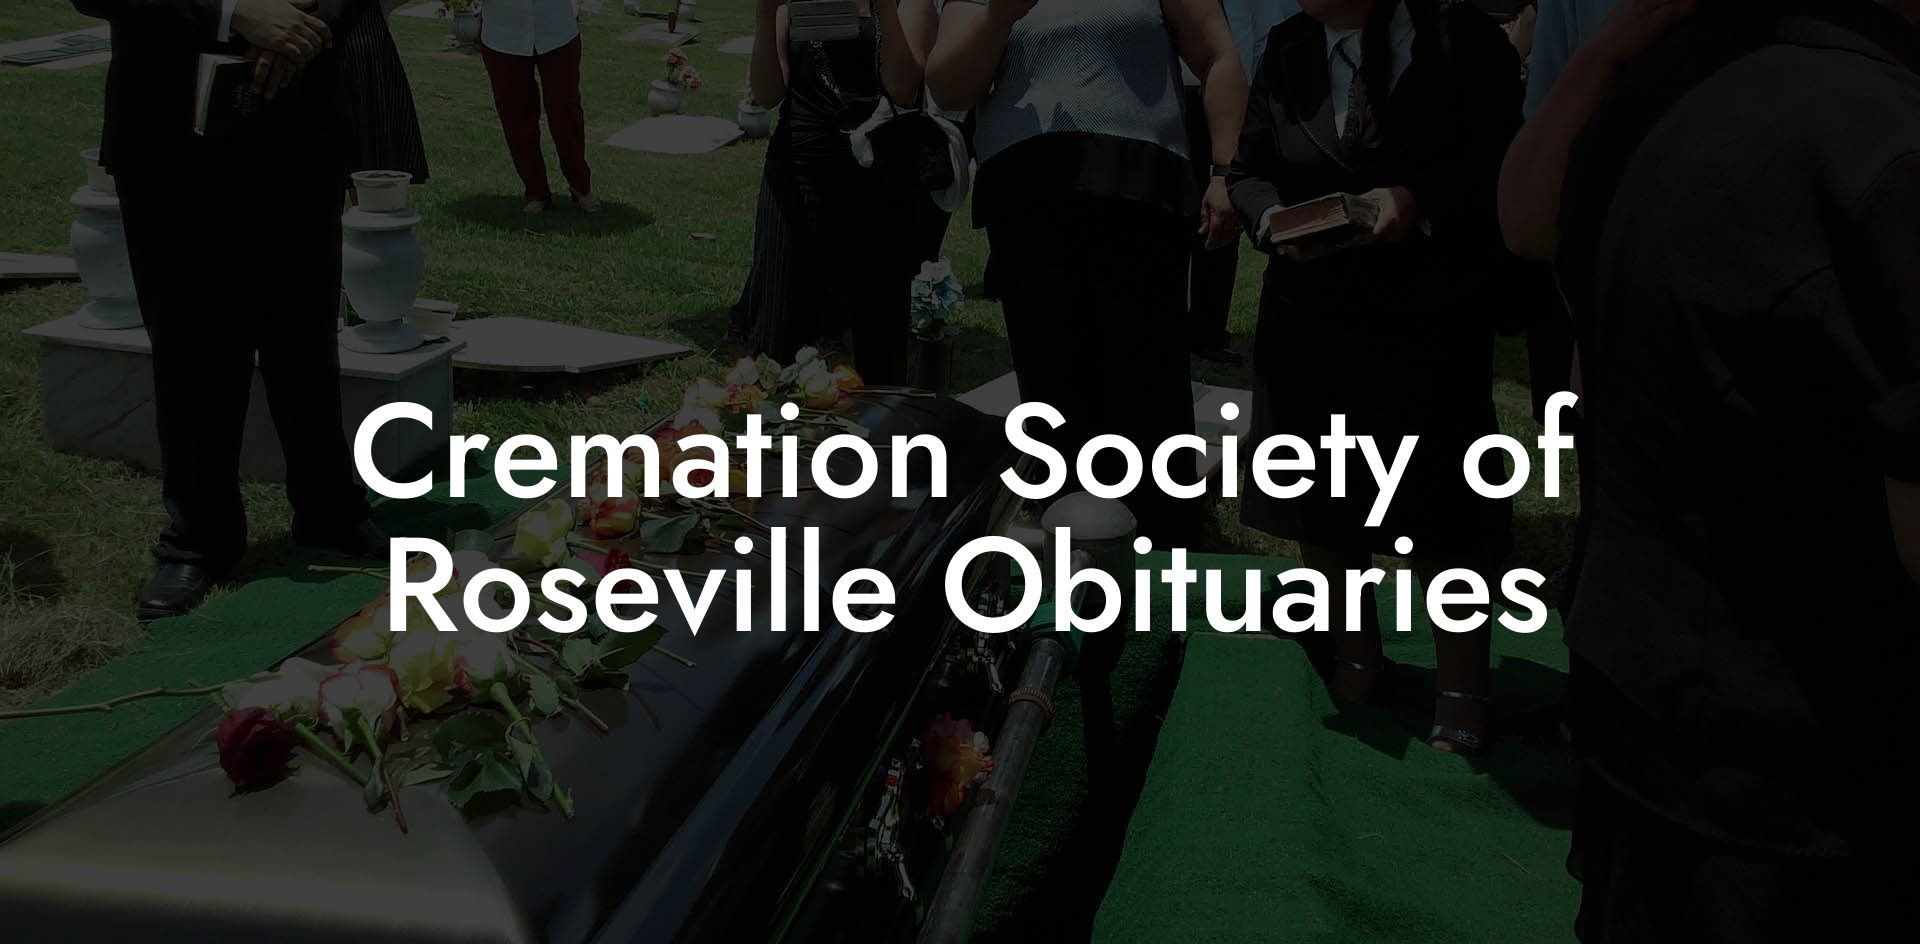 Cremation Society of Roseville Obituaries